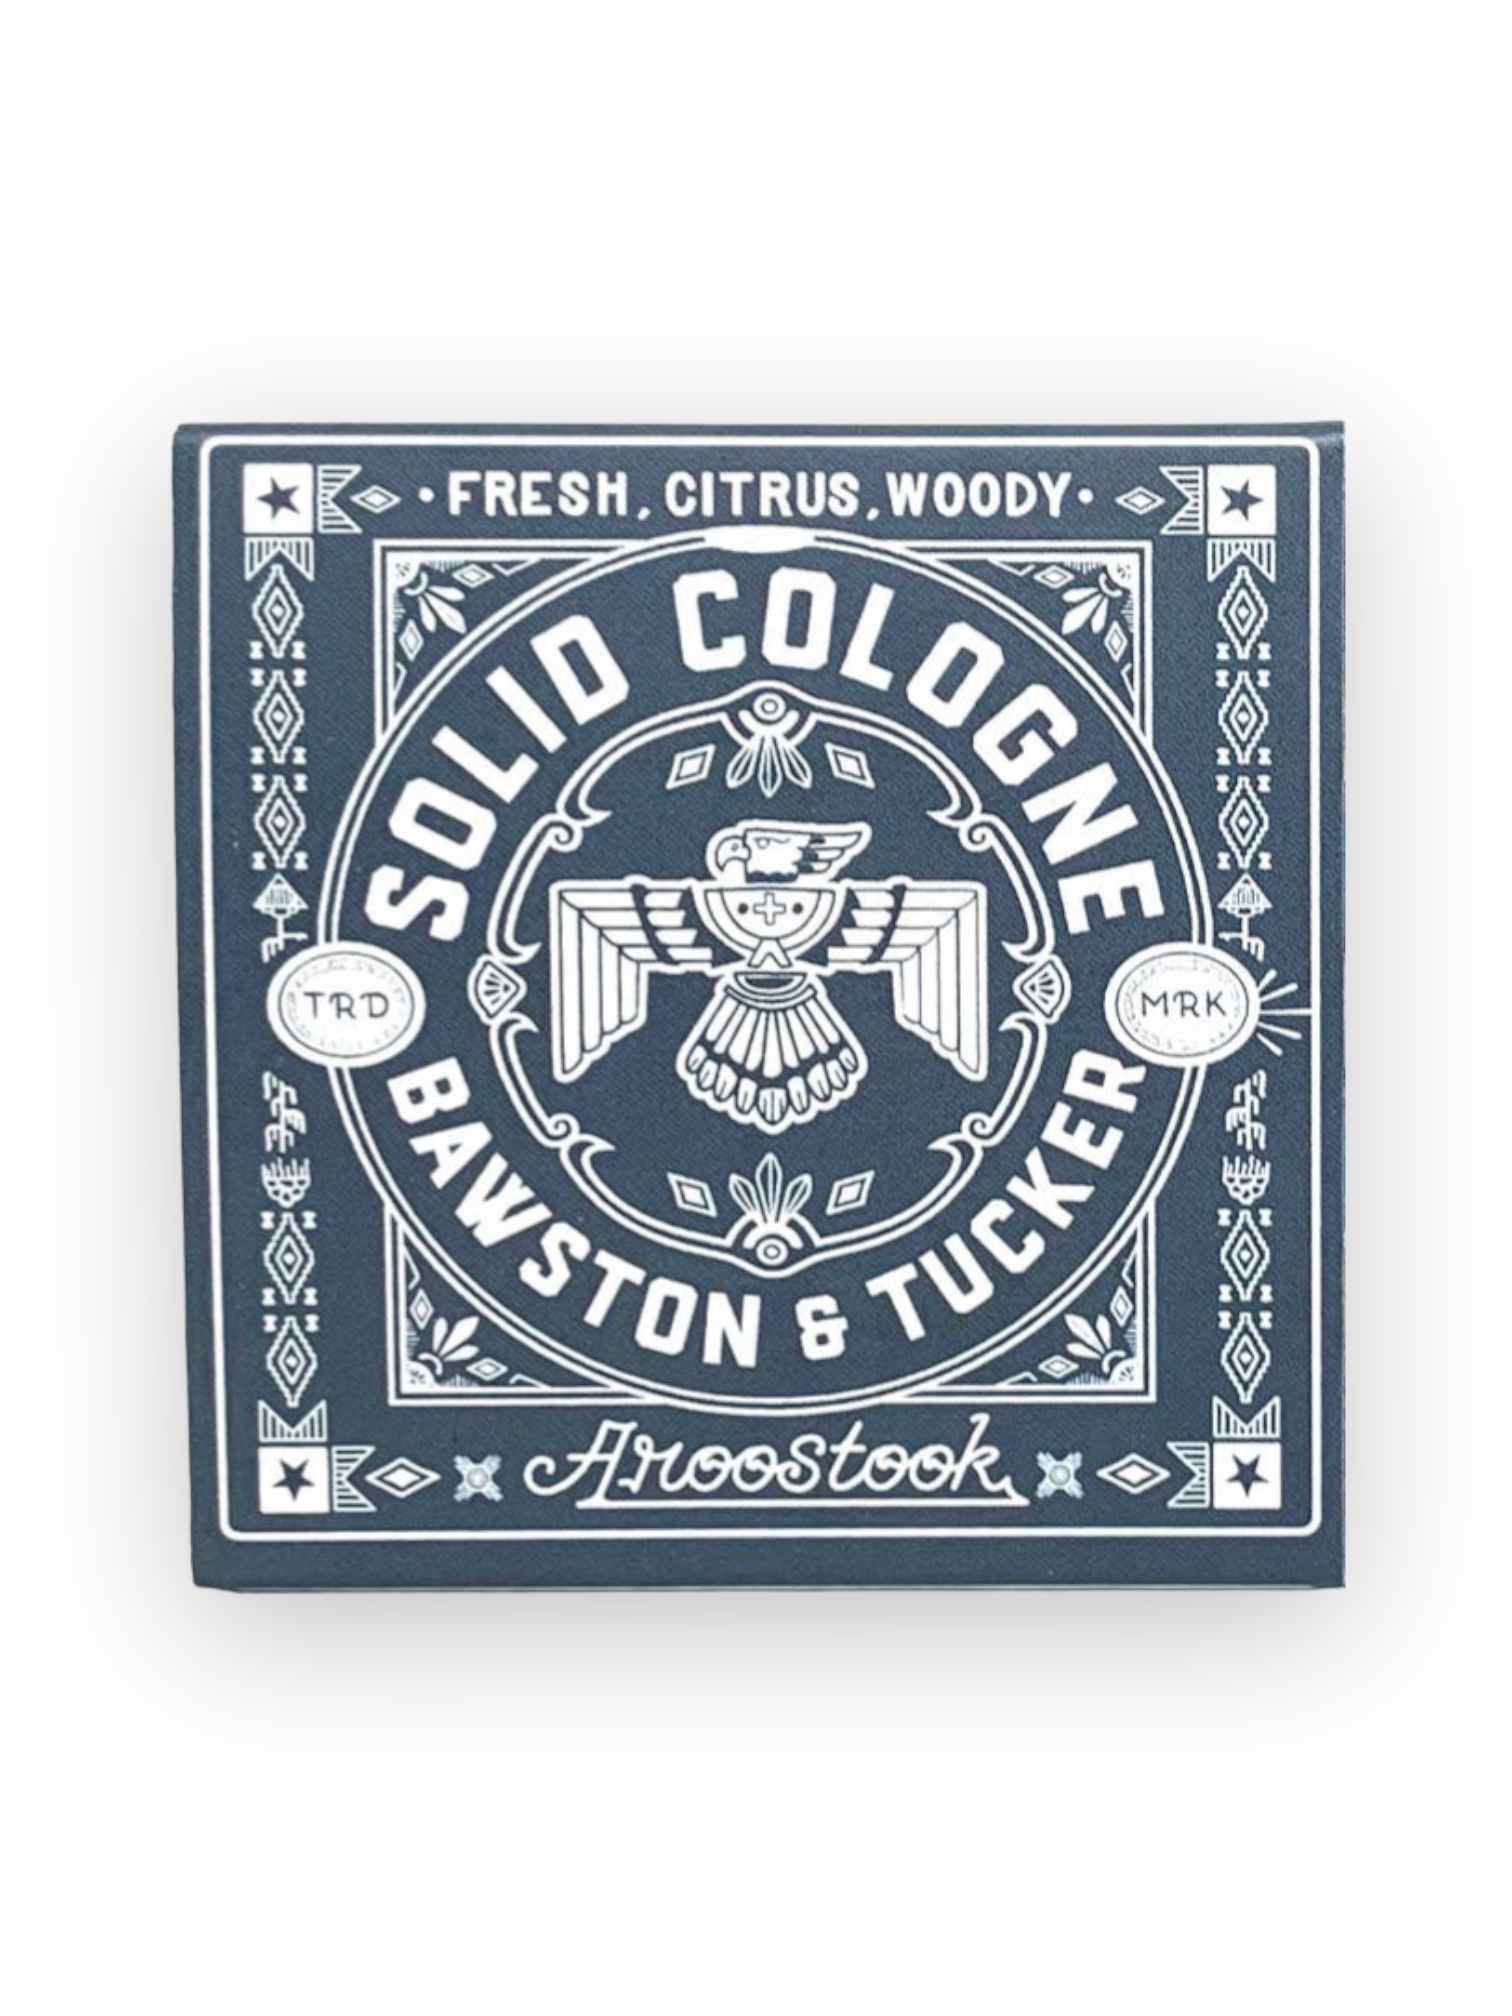 Aroostook Solid Cologne by Bawston and Tucker Provisions Sold by Le Monkey House